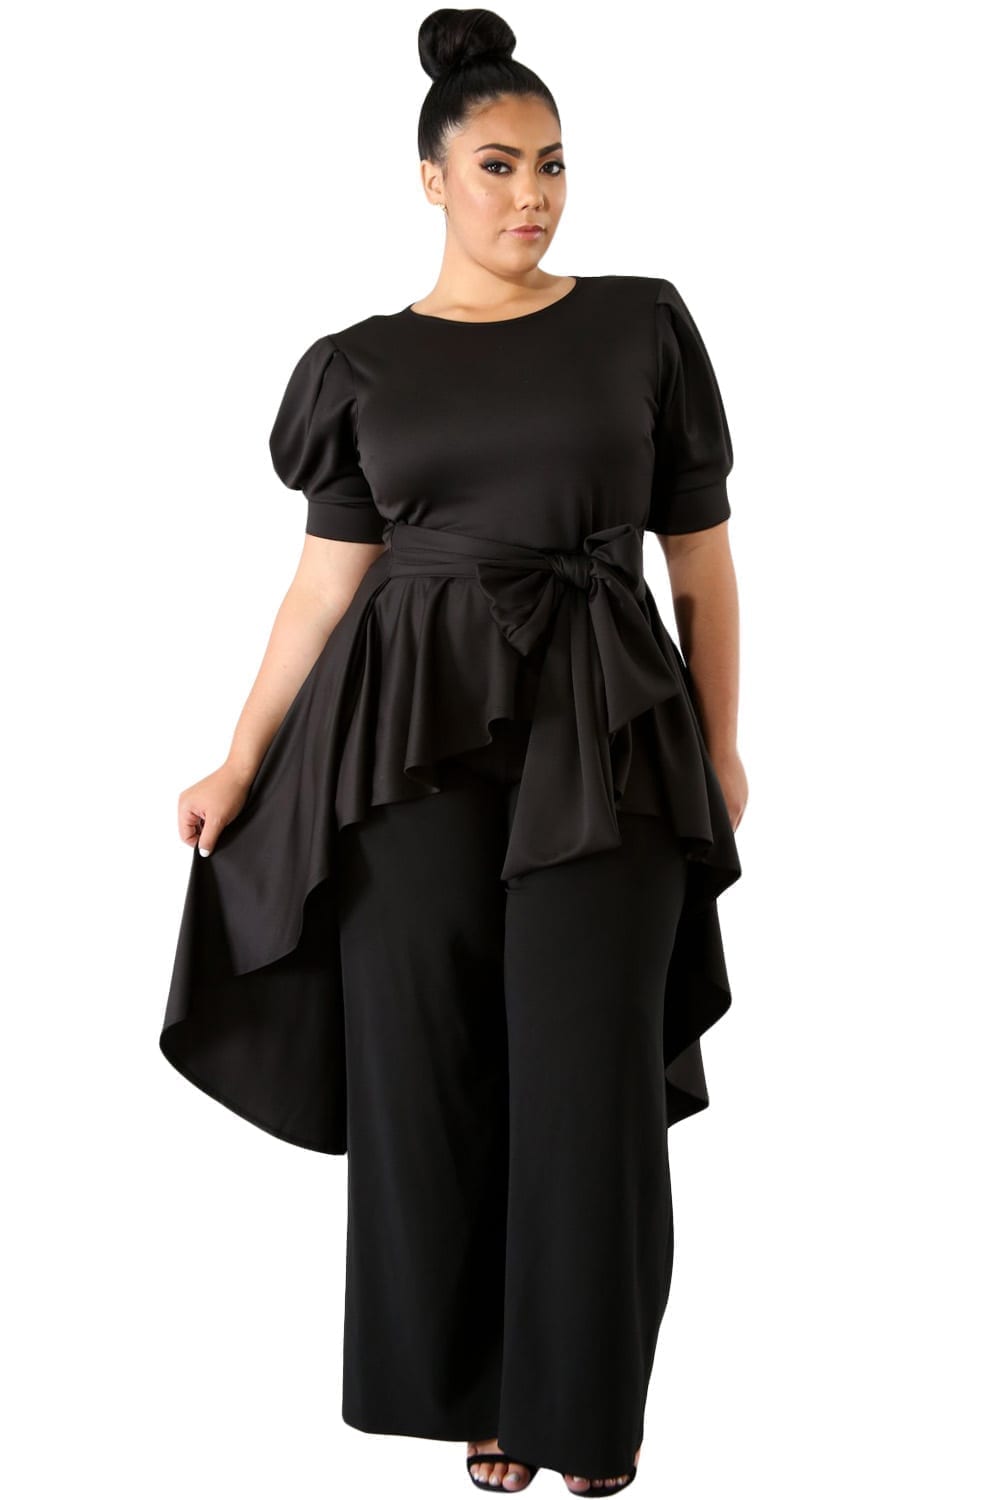 Black-Puff-Long-Tail-Plus-Size-Top-LC251